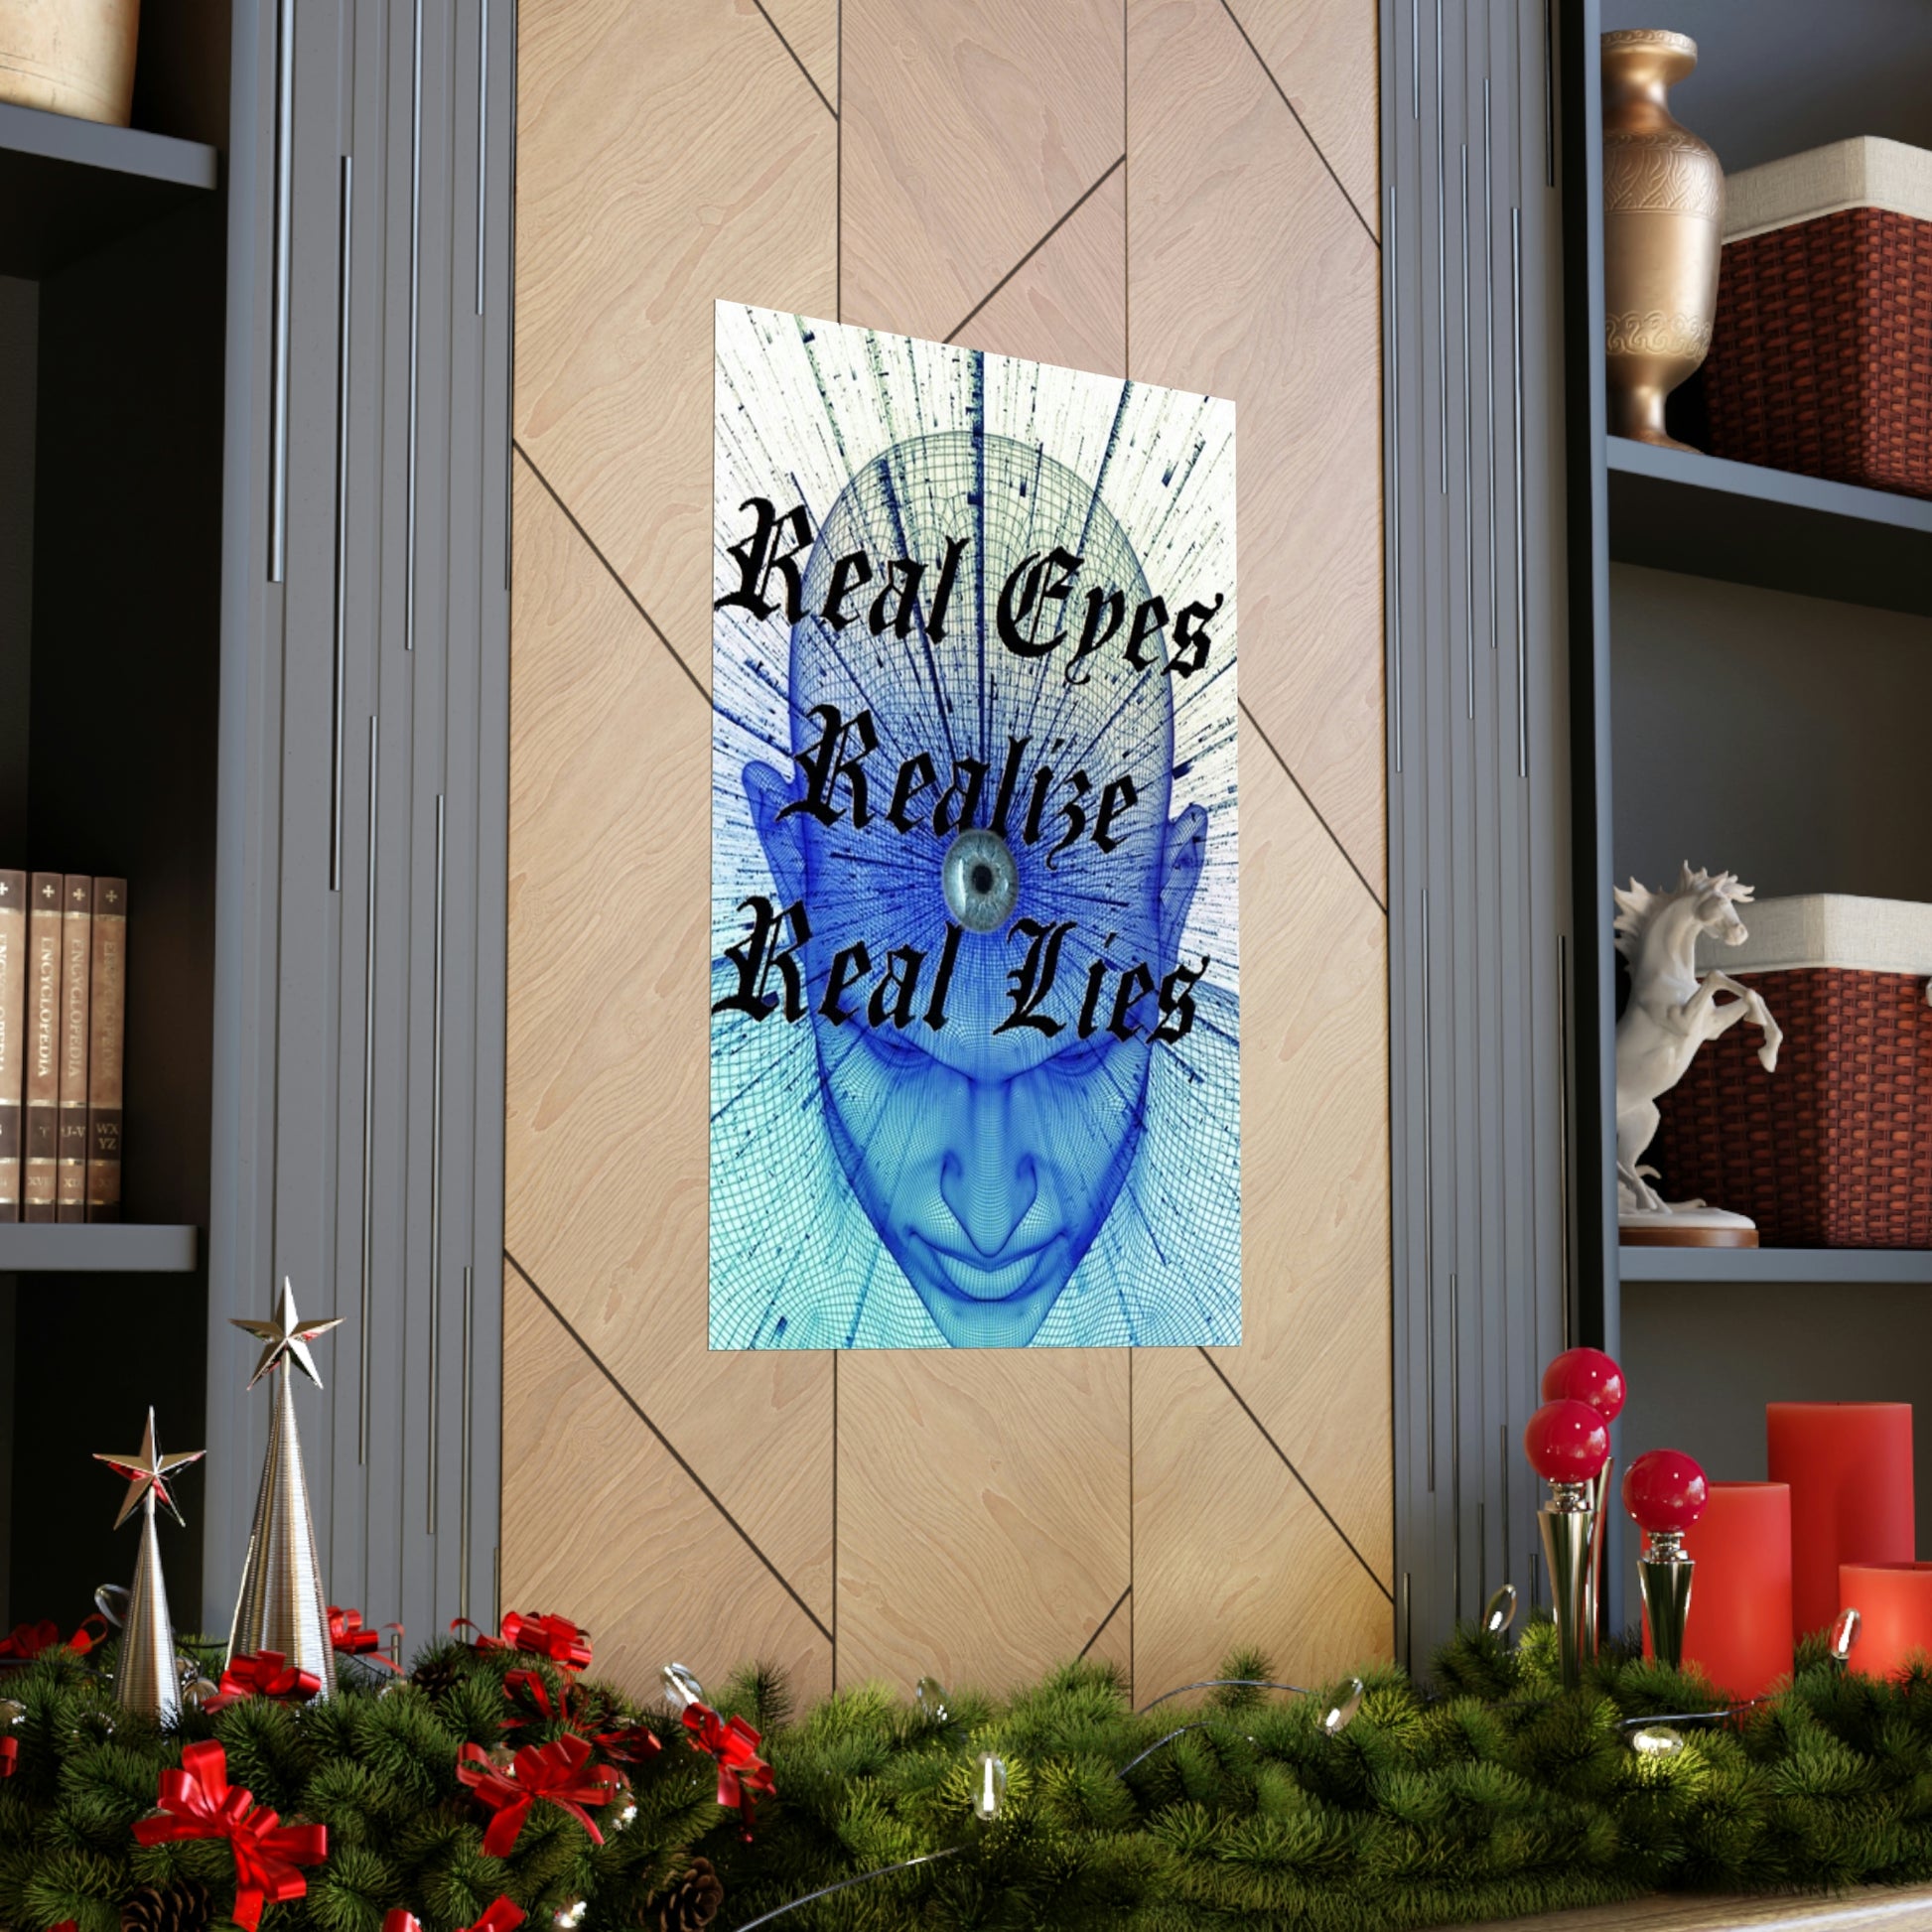 Real Eyes Realize Real Lies Poster